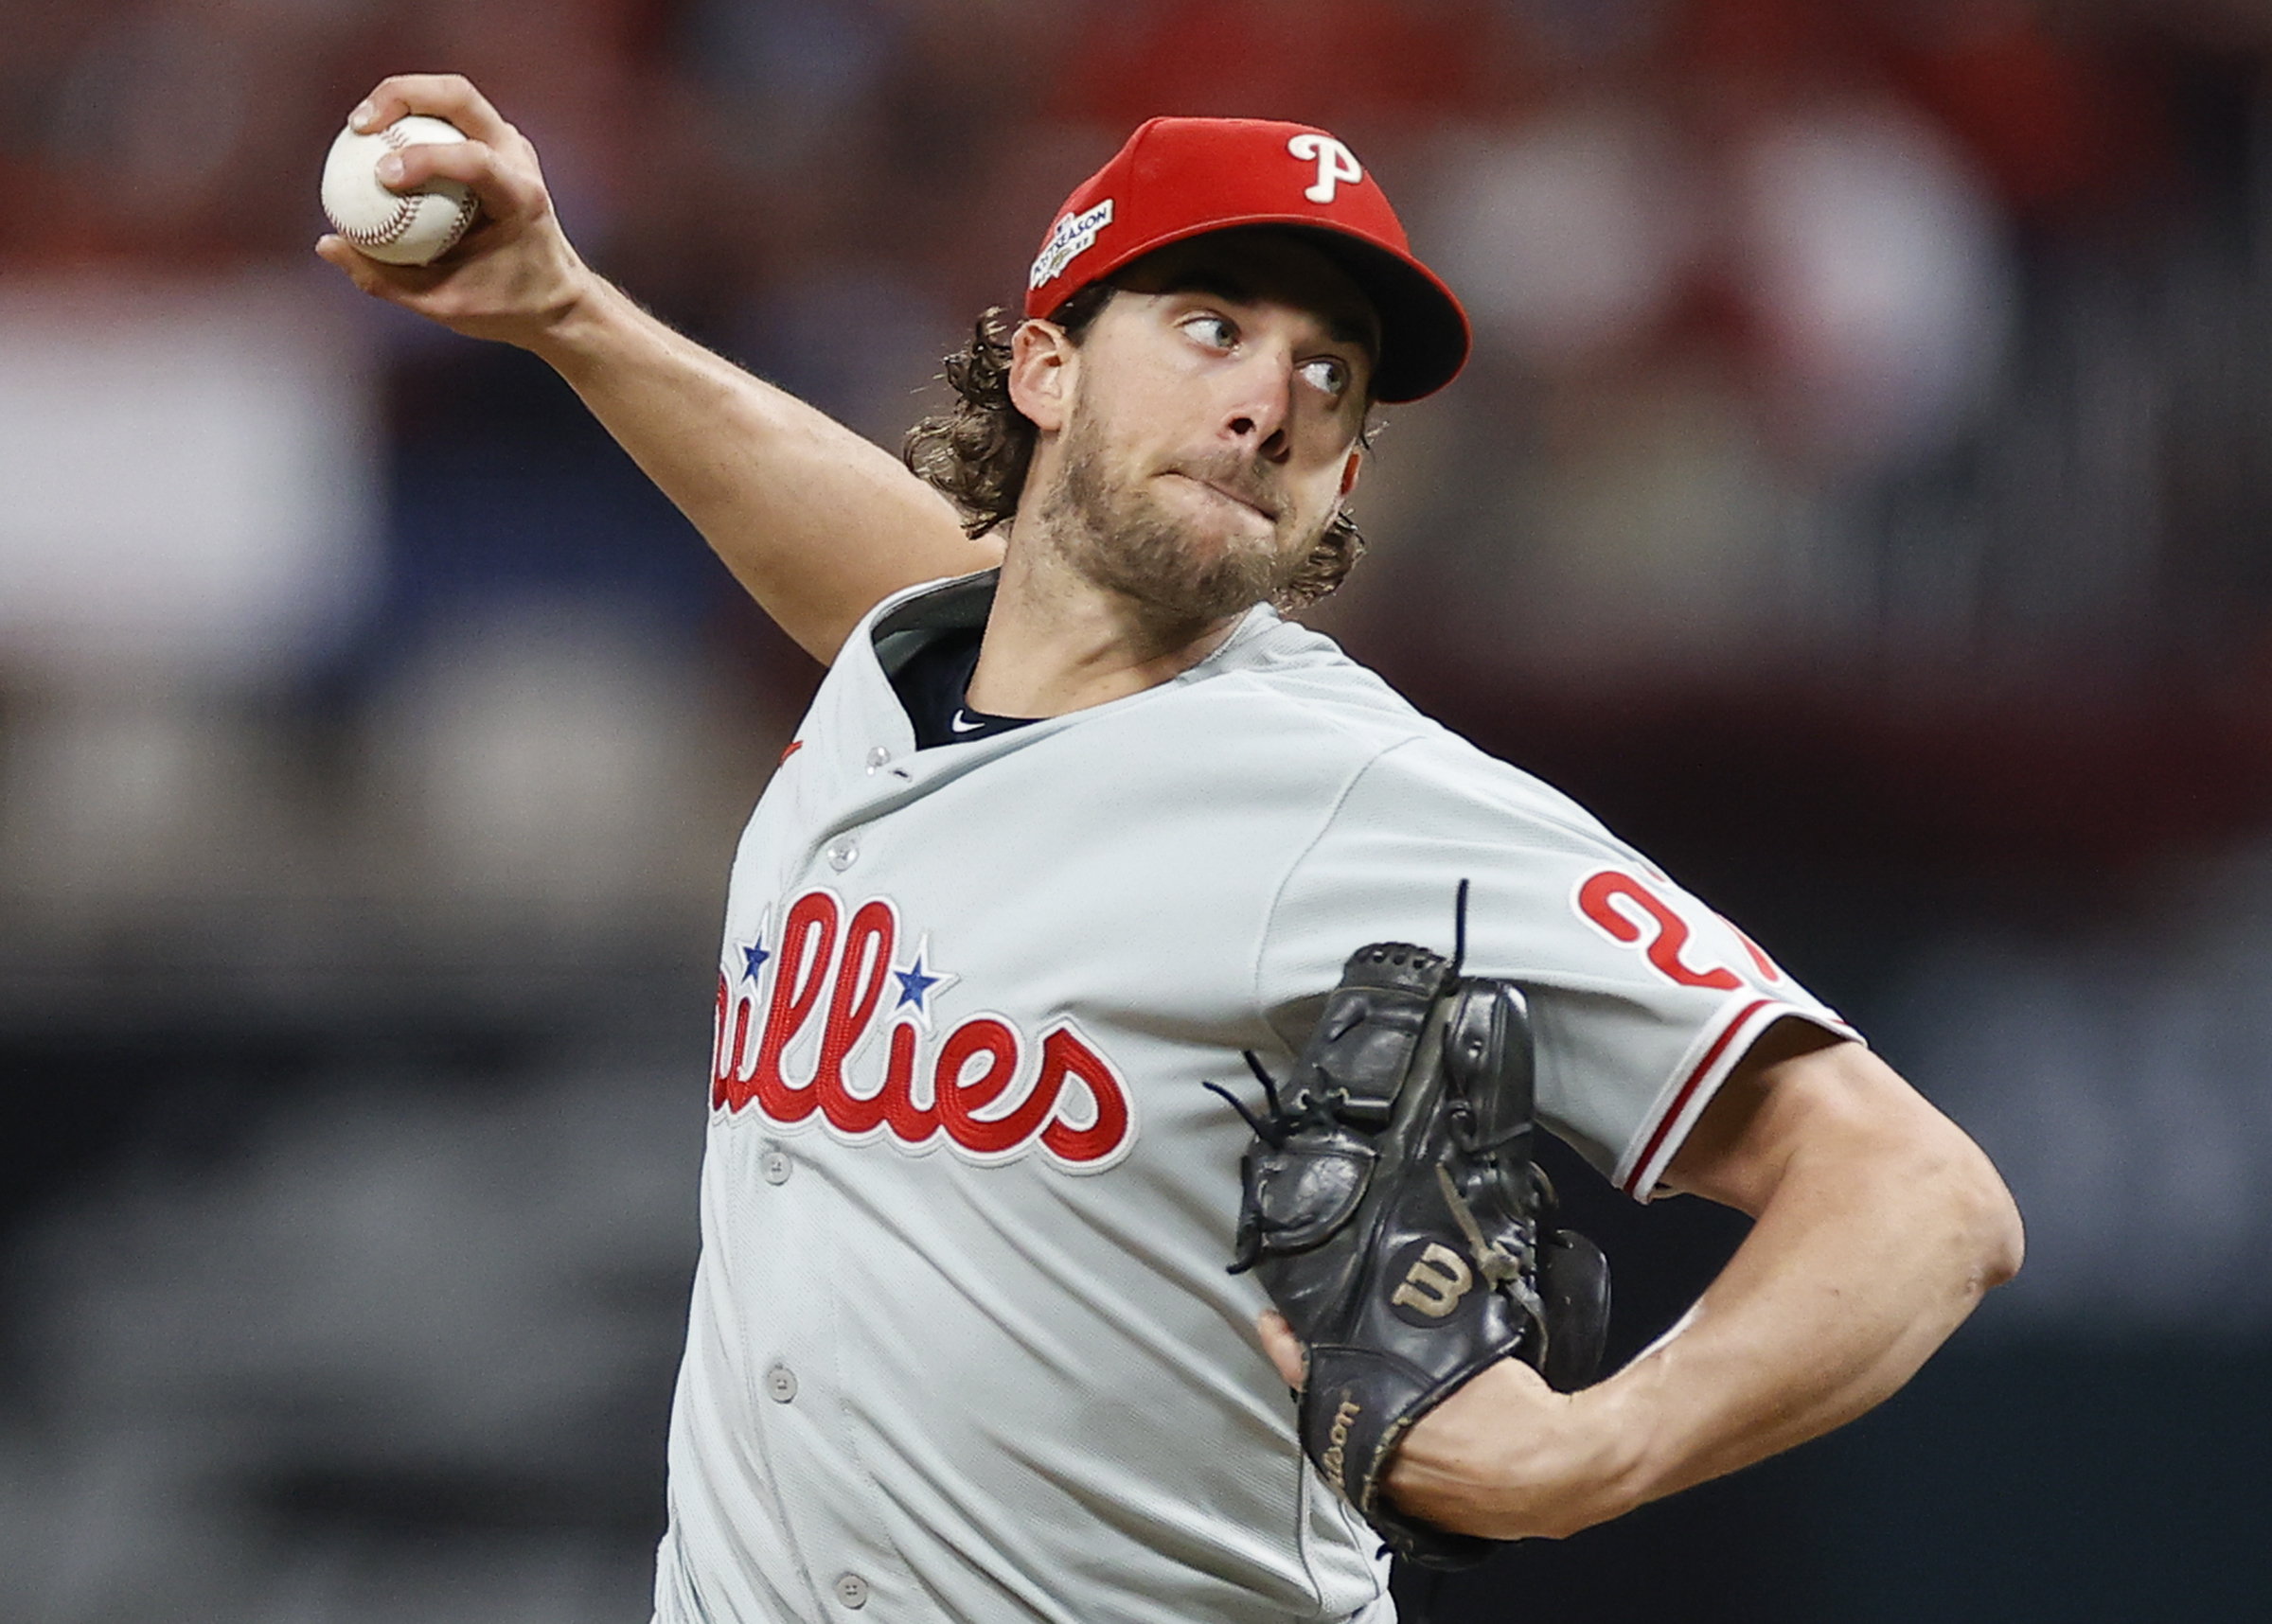 Vintage' Aaron Nola: Phillies starter makes a change, then shows his stuff  in no-hit bid vs. Tigers - The Athletic